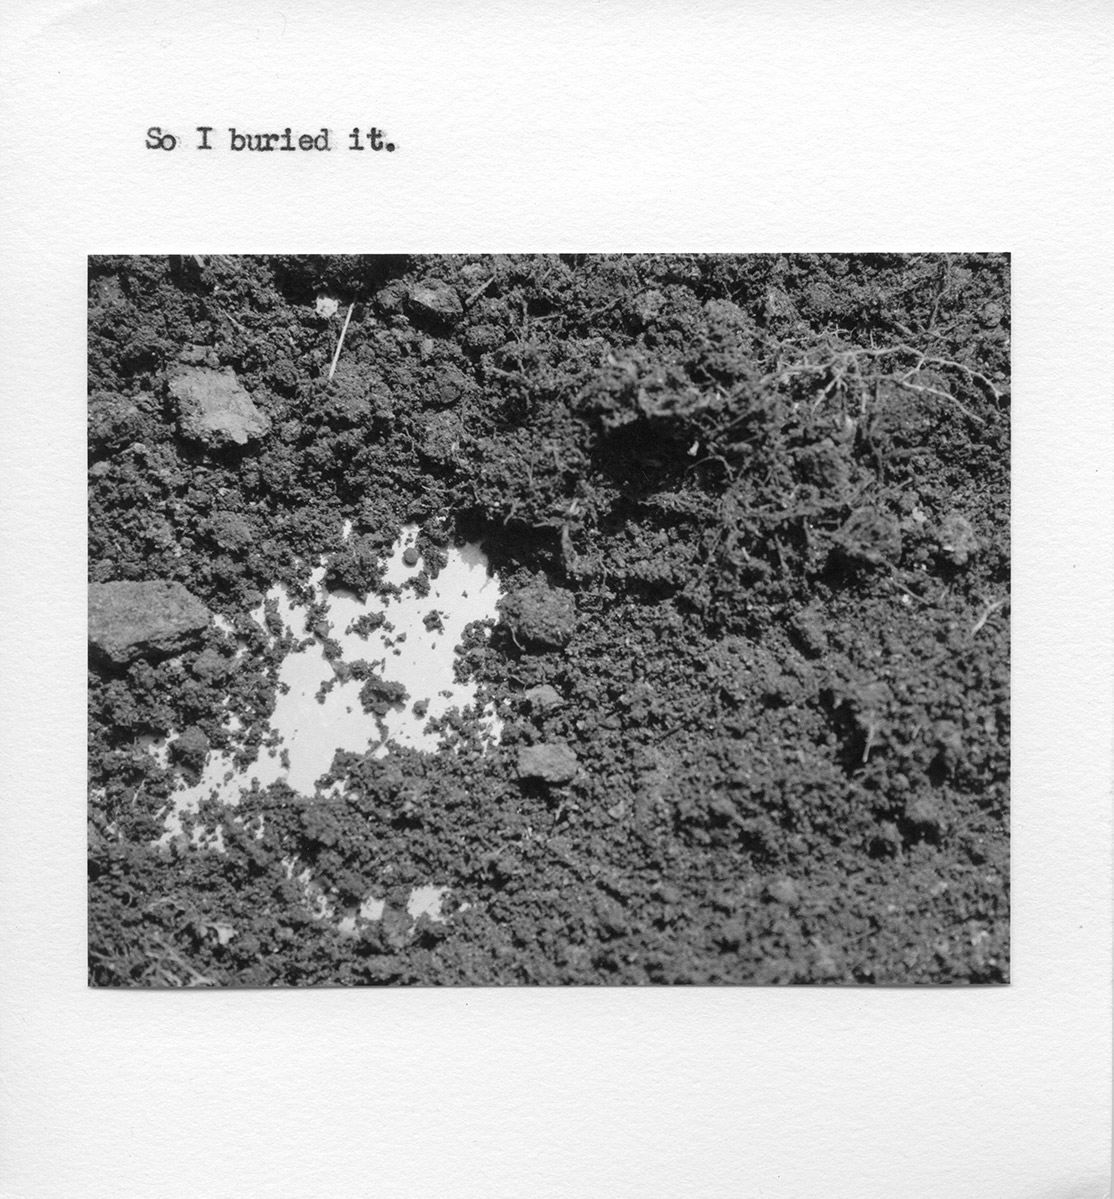 A photo a smooth surfacing peeking out beneath dirt. The text reads: “So I buried it.”